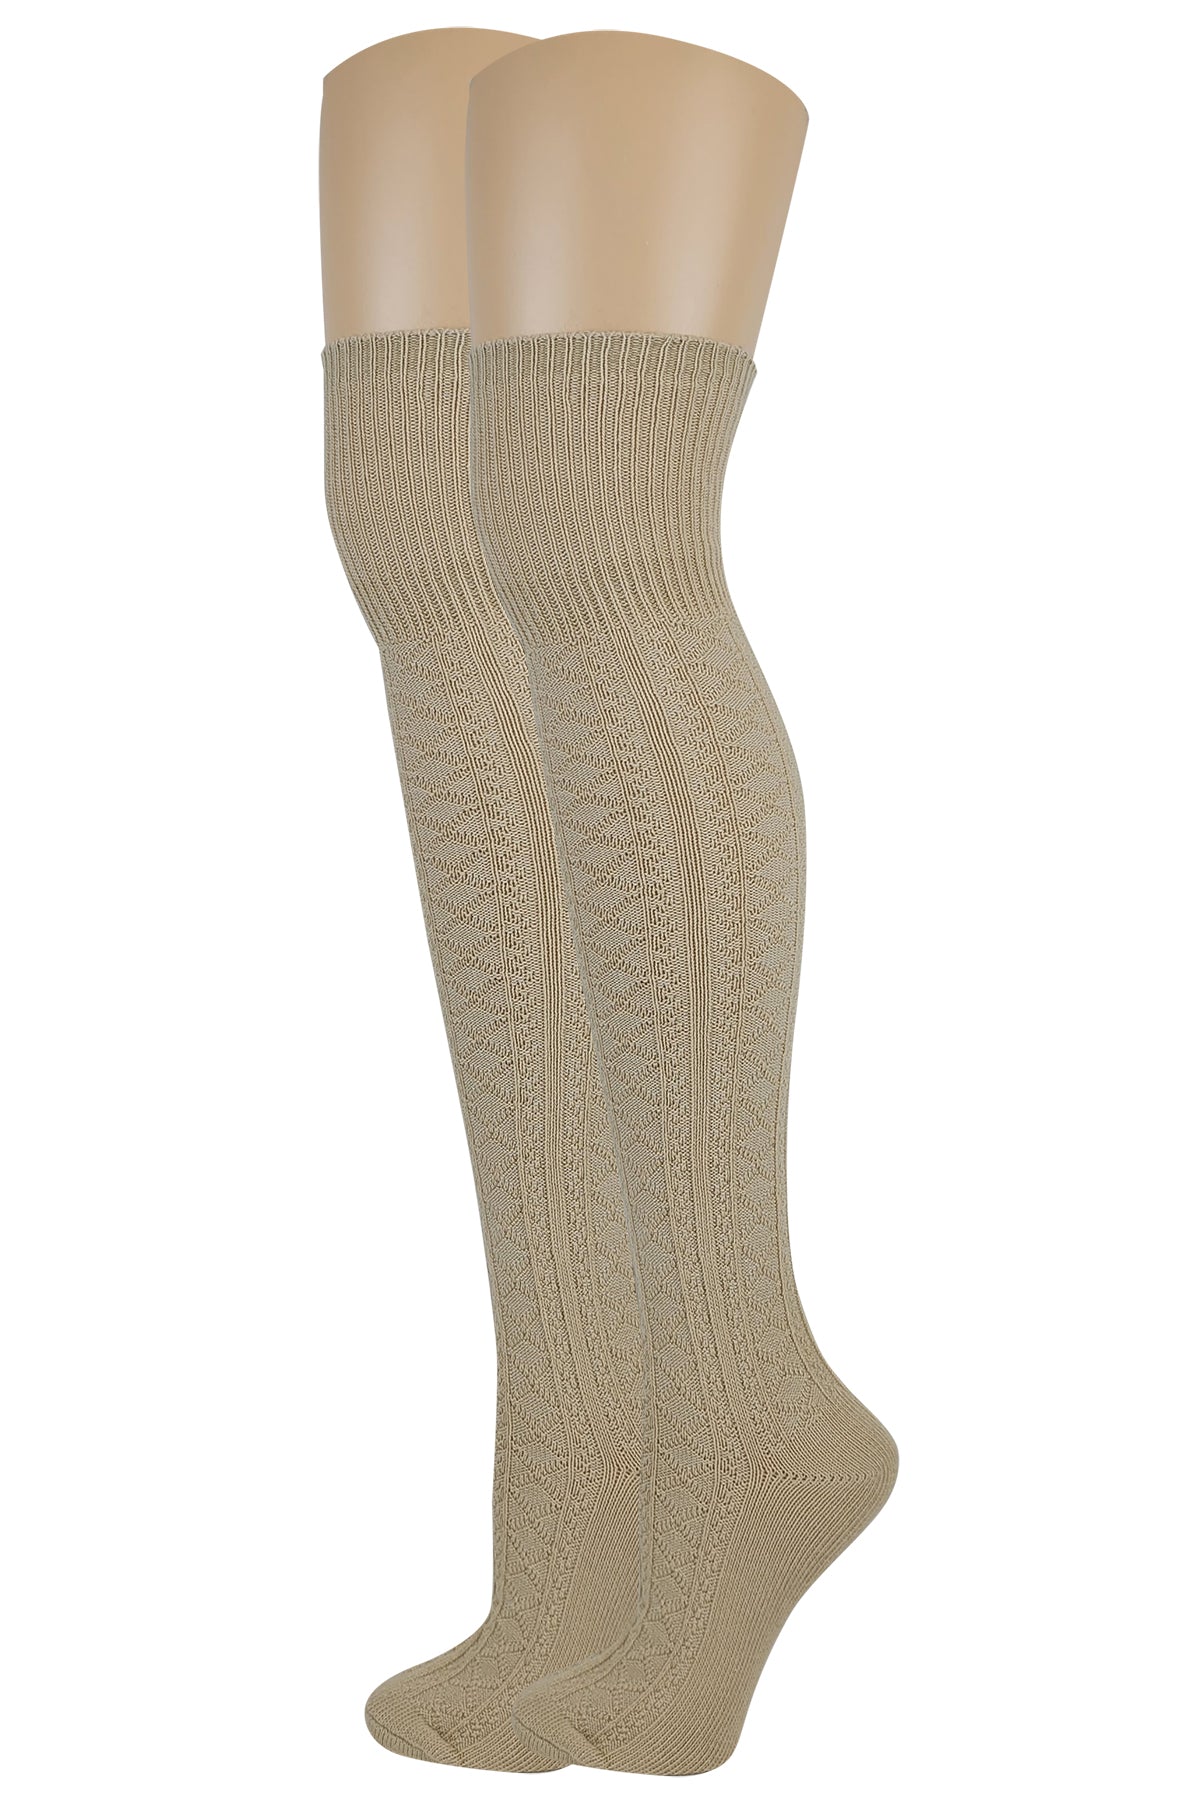 Over the Knee Tigh-High Socks | Knit Assorted Colors | Women (6 Pairs)